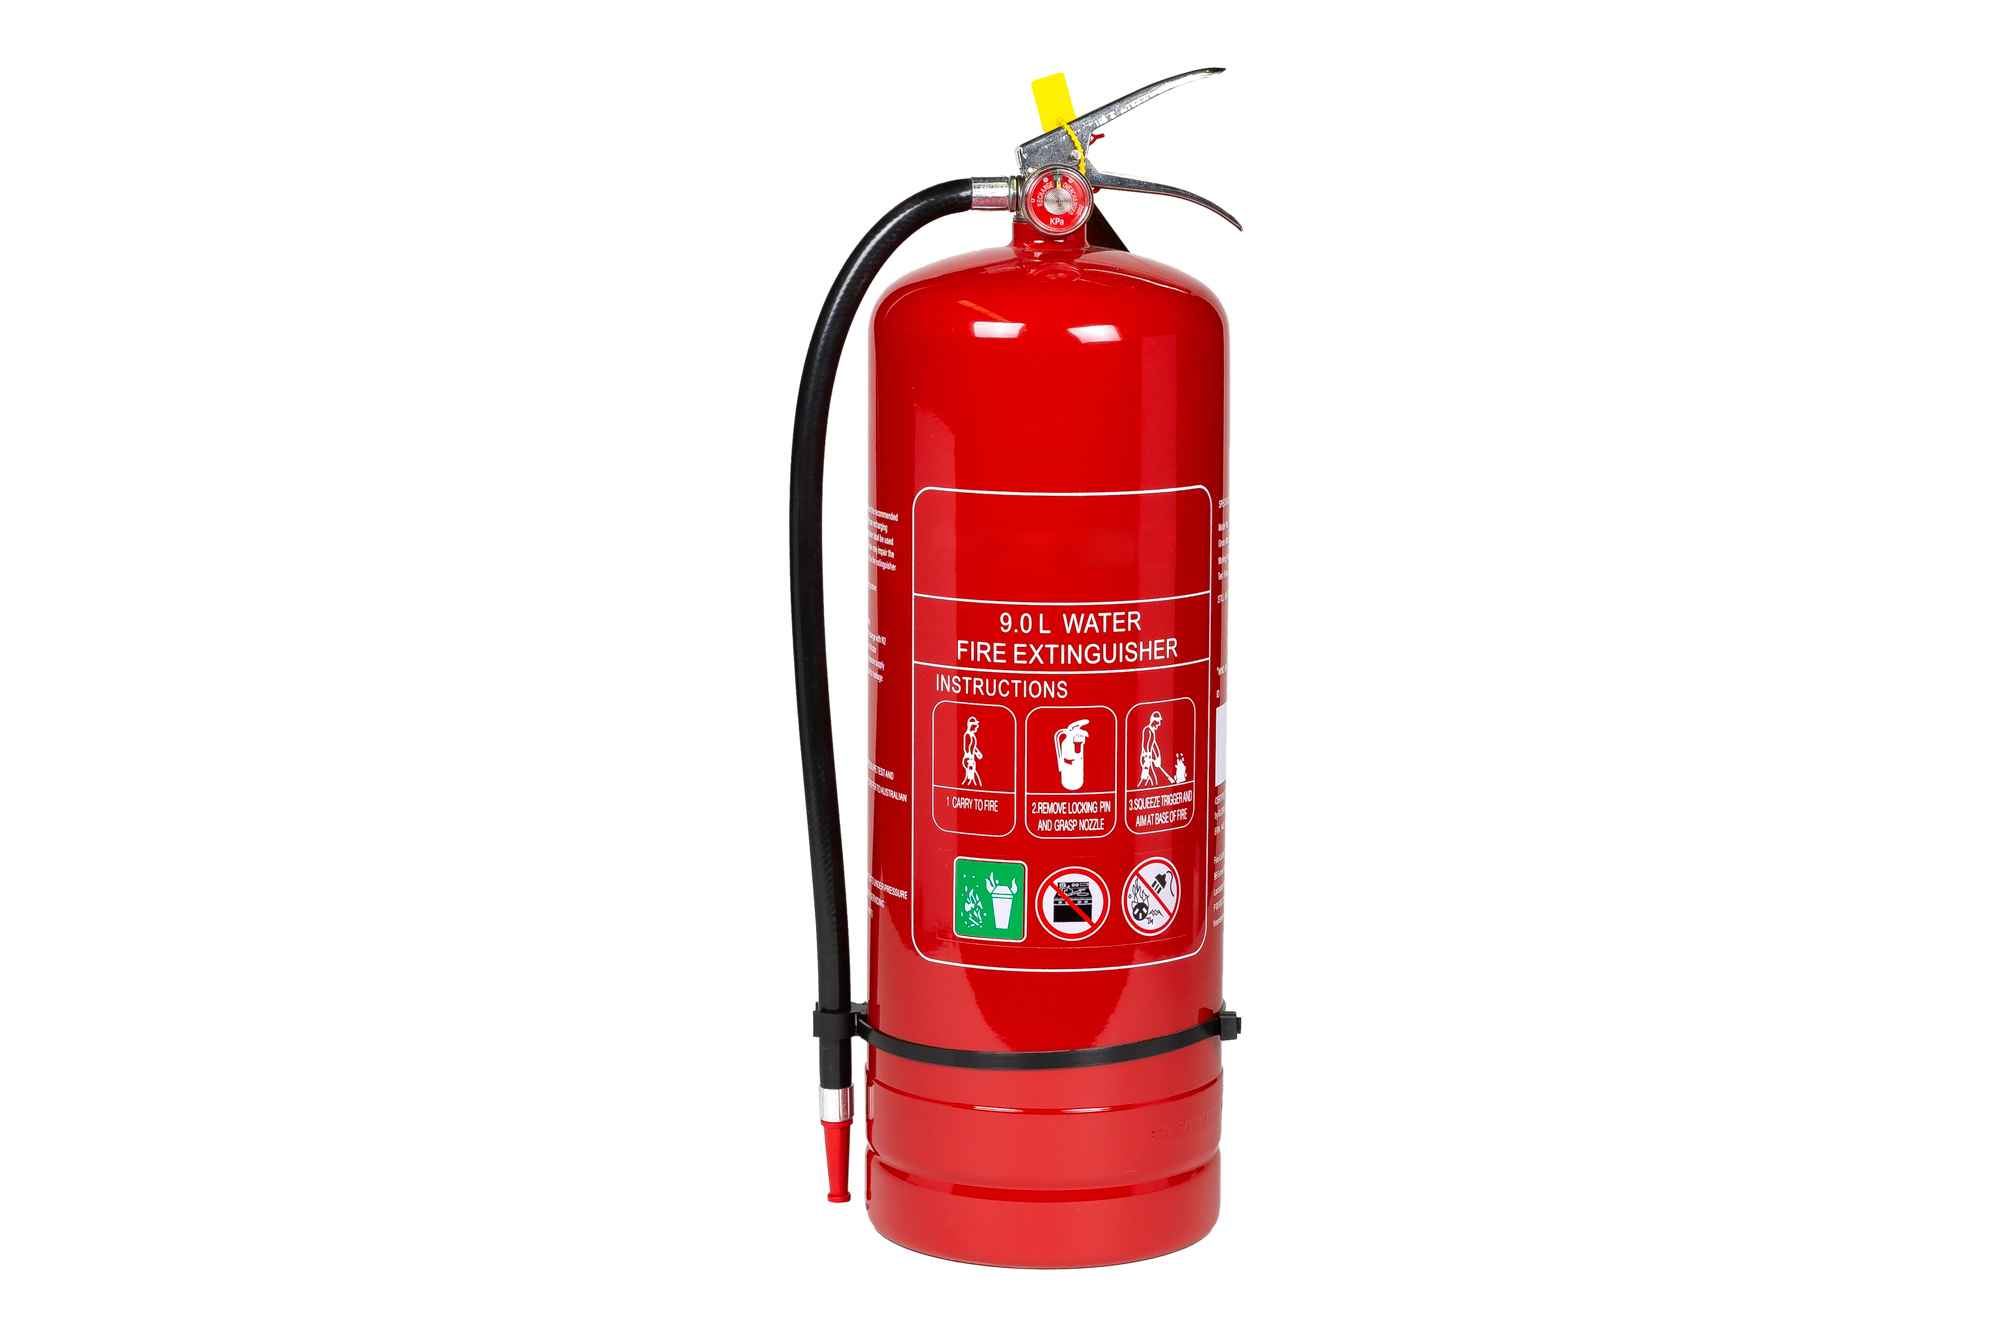 9.0L WATER FIRE EXTINGUISHER-AS/NZS1841